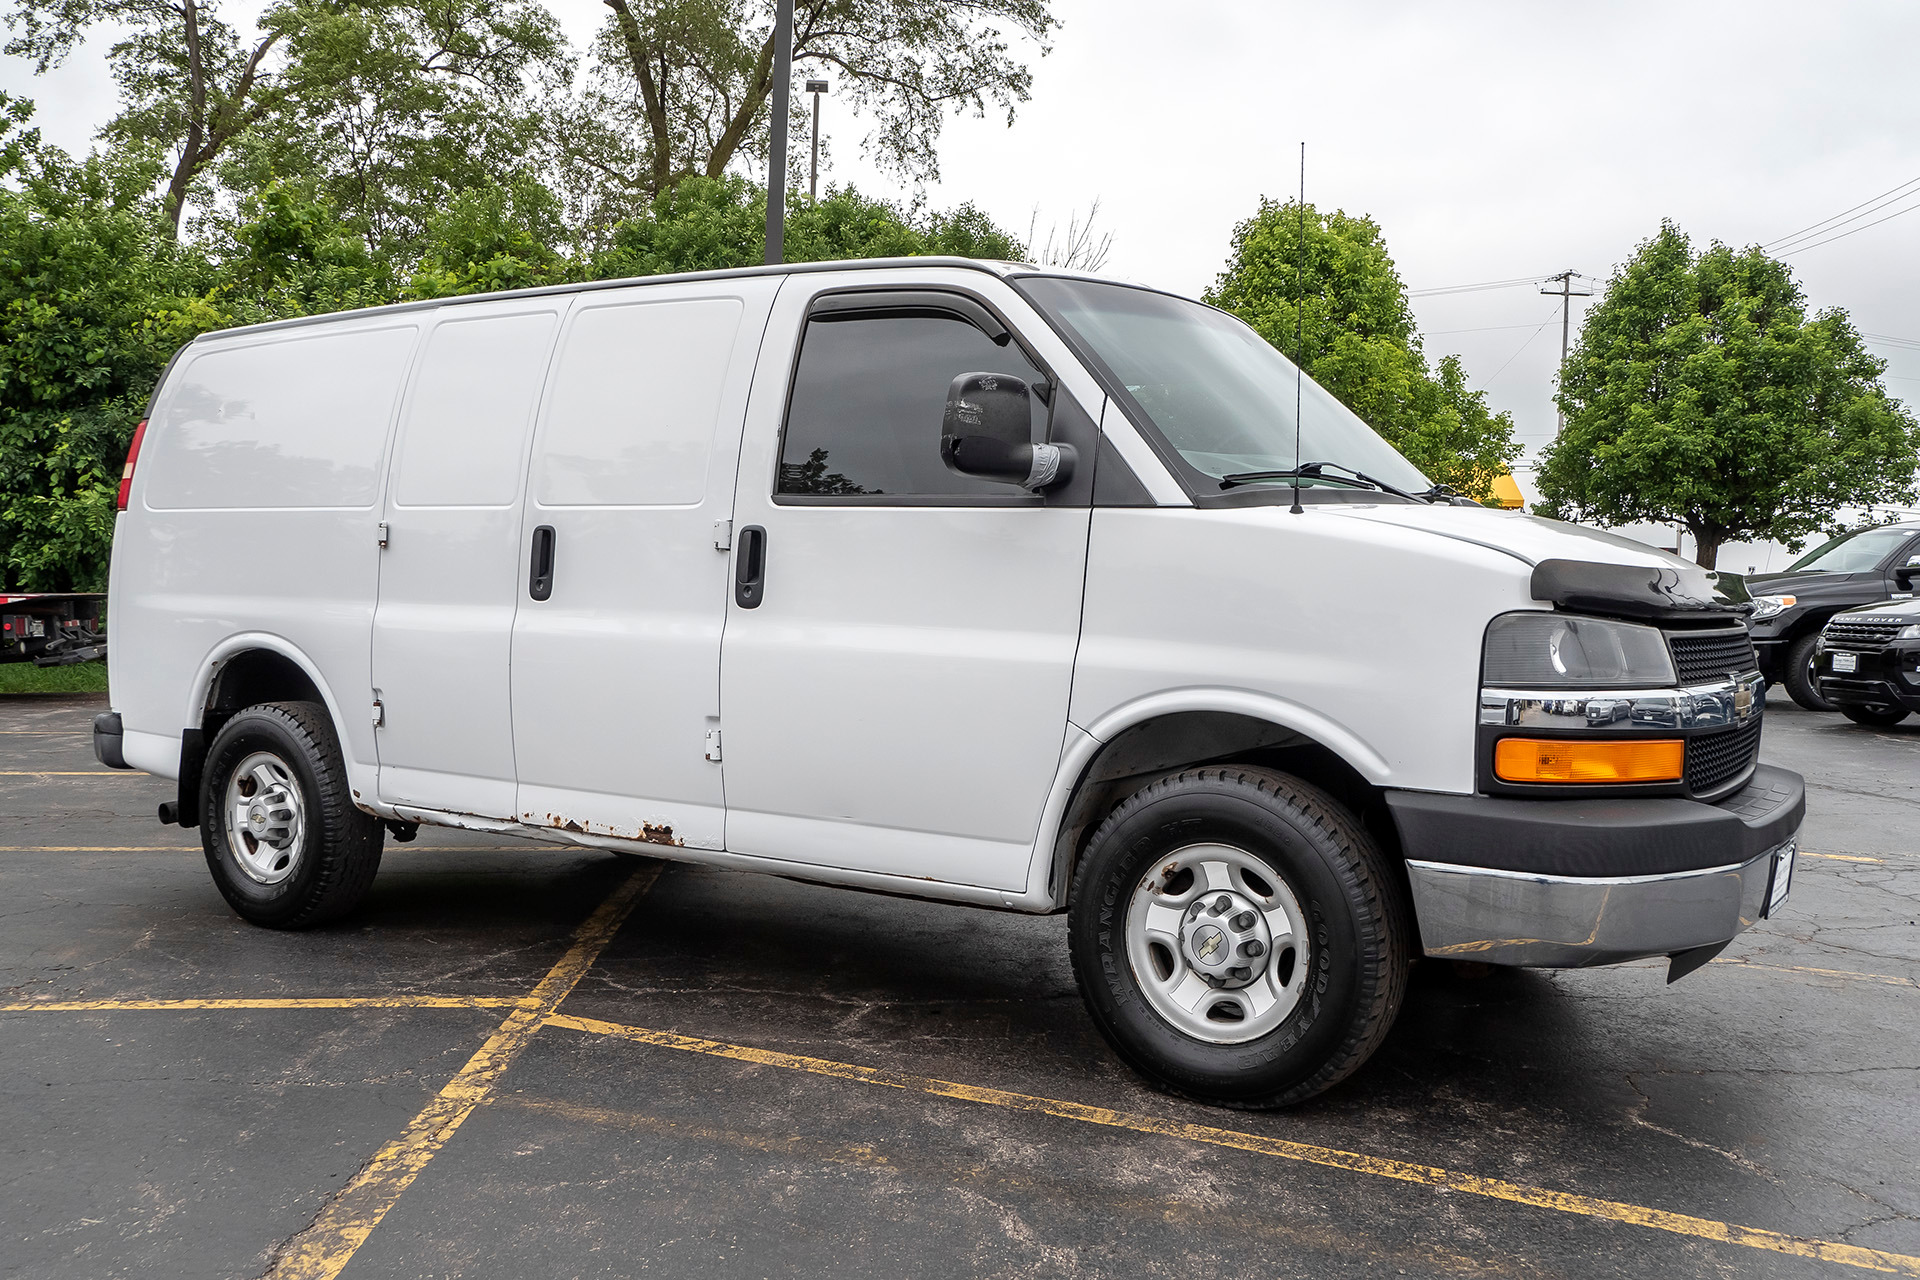 Used 2007 Chevrolet Express Cargo 2500 Van For Sale 5500 Chicago